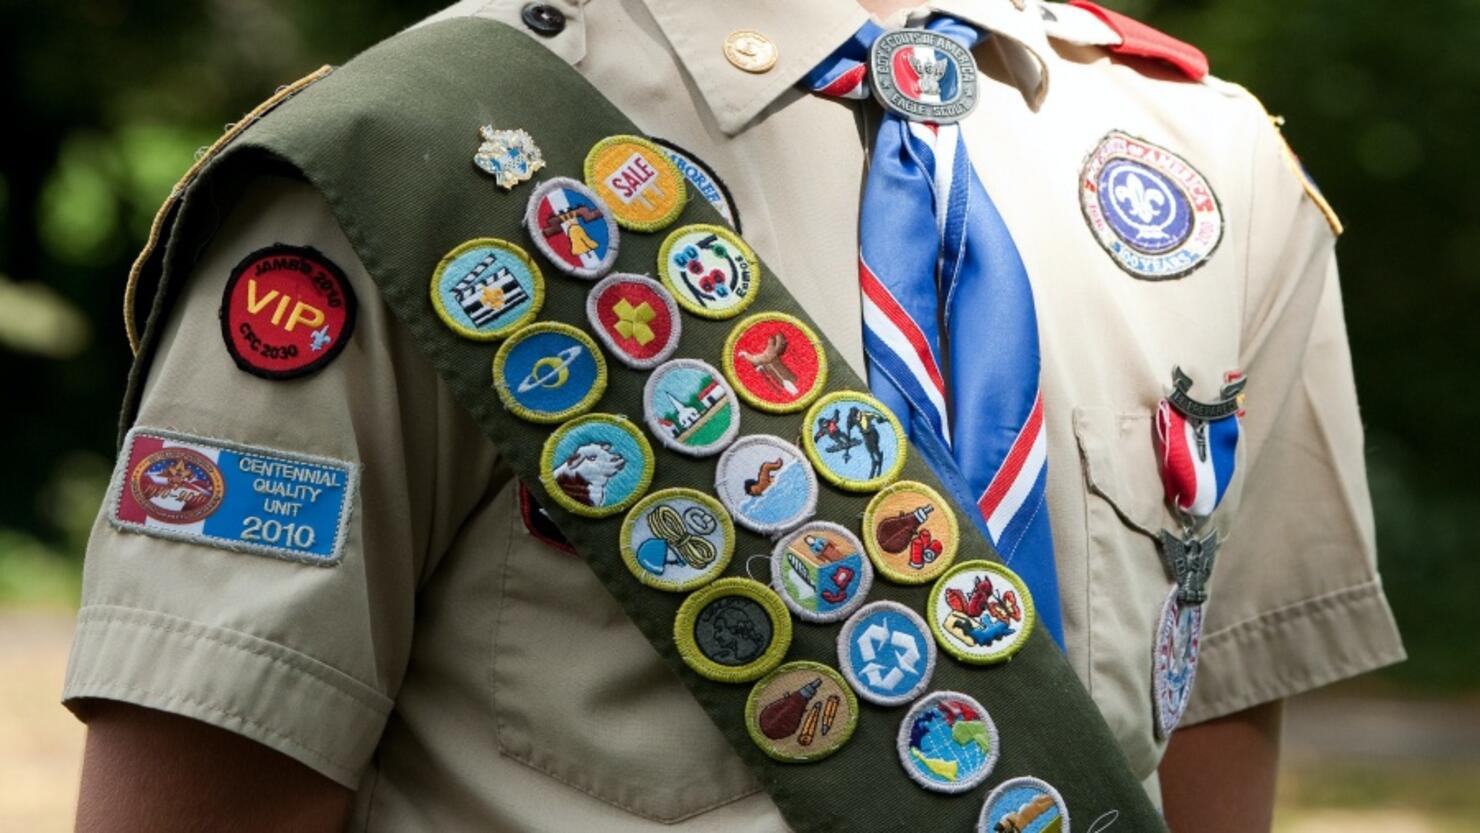 Dallas Teen Set To Become One Of The First Female Eagle Scouts | iHeart